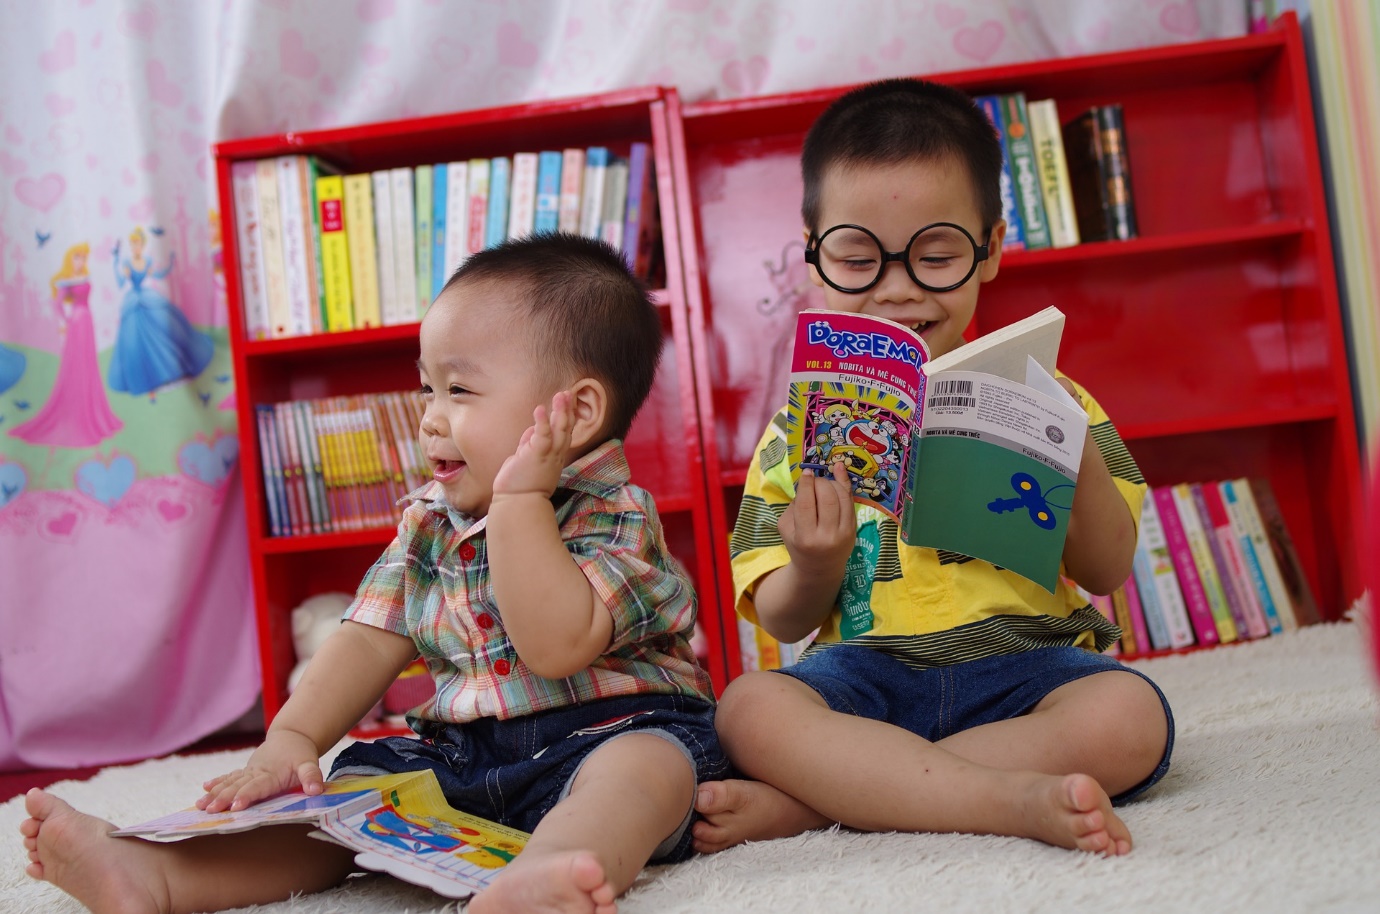 Starting preschool marks your child’s first formal years of structured education.